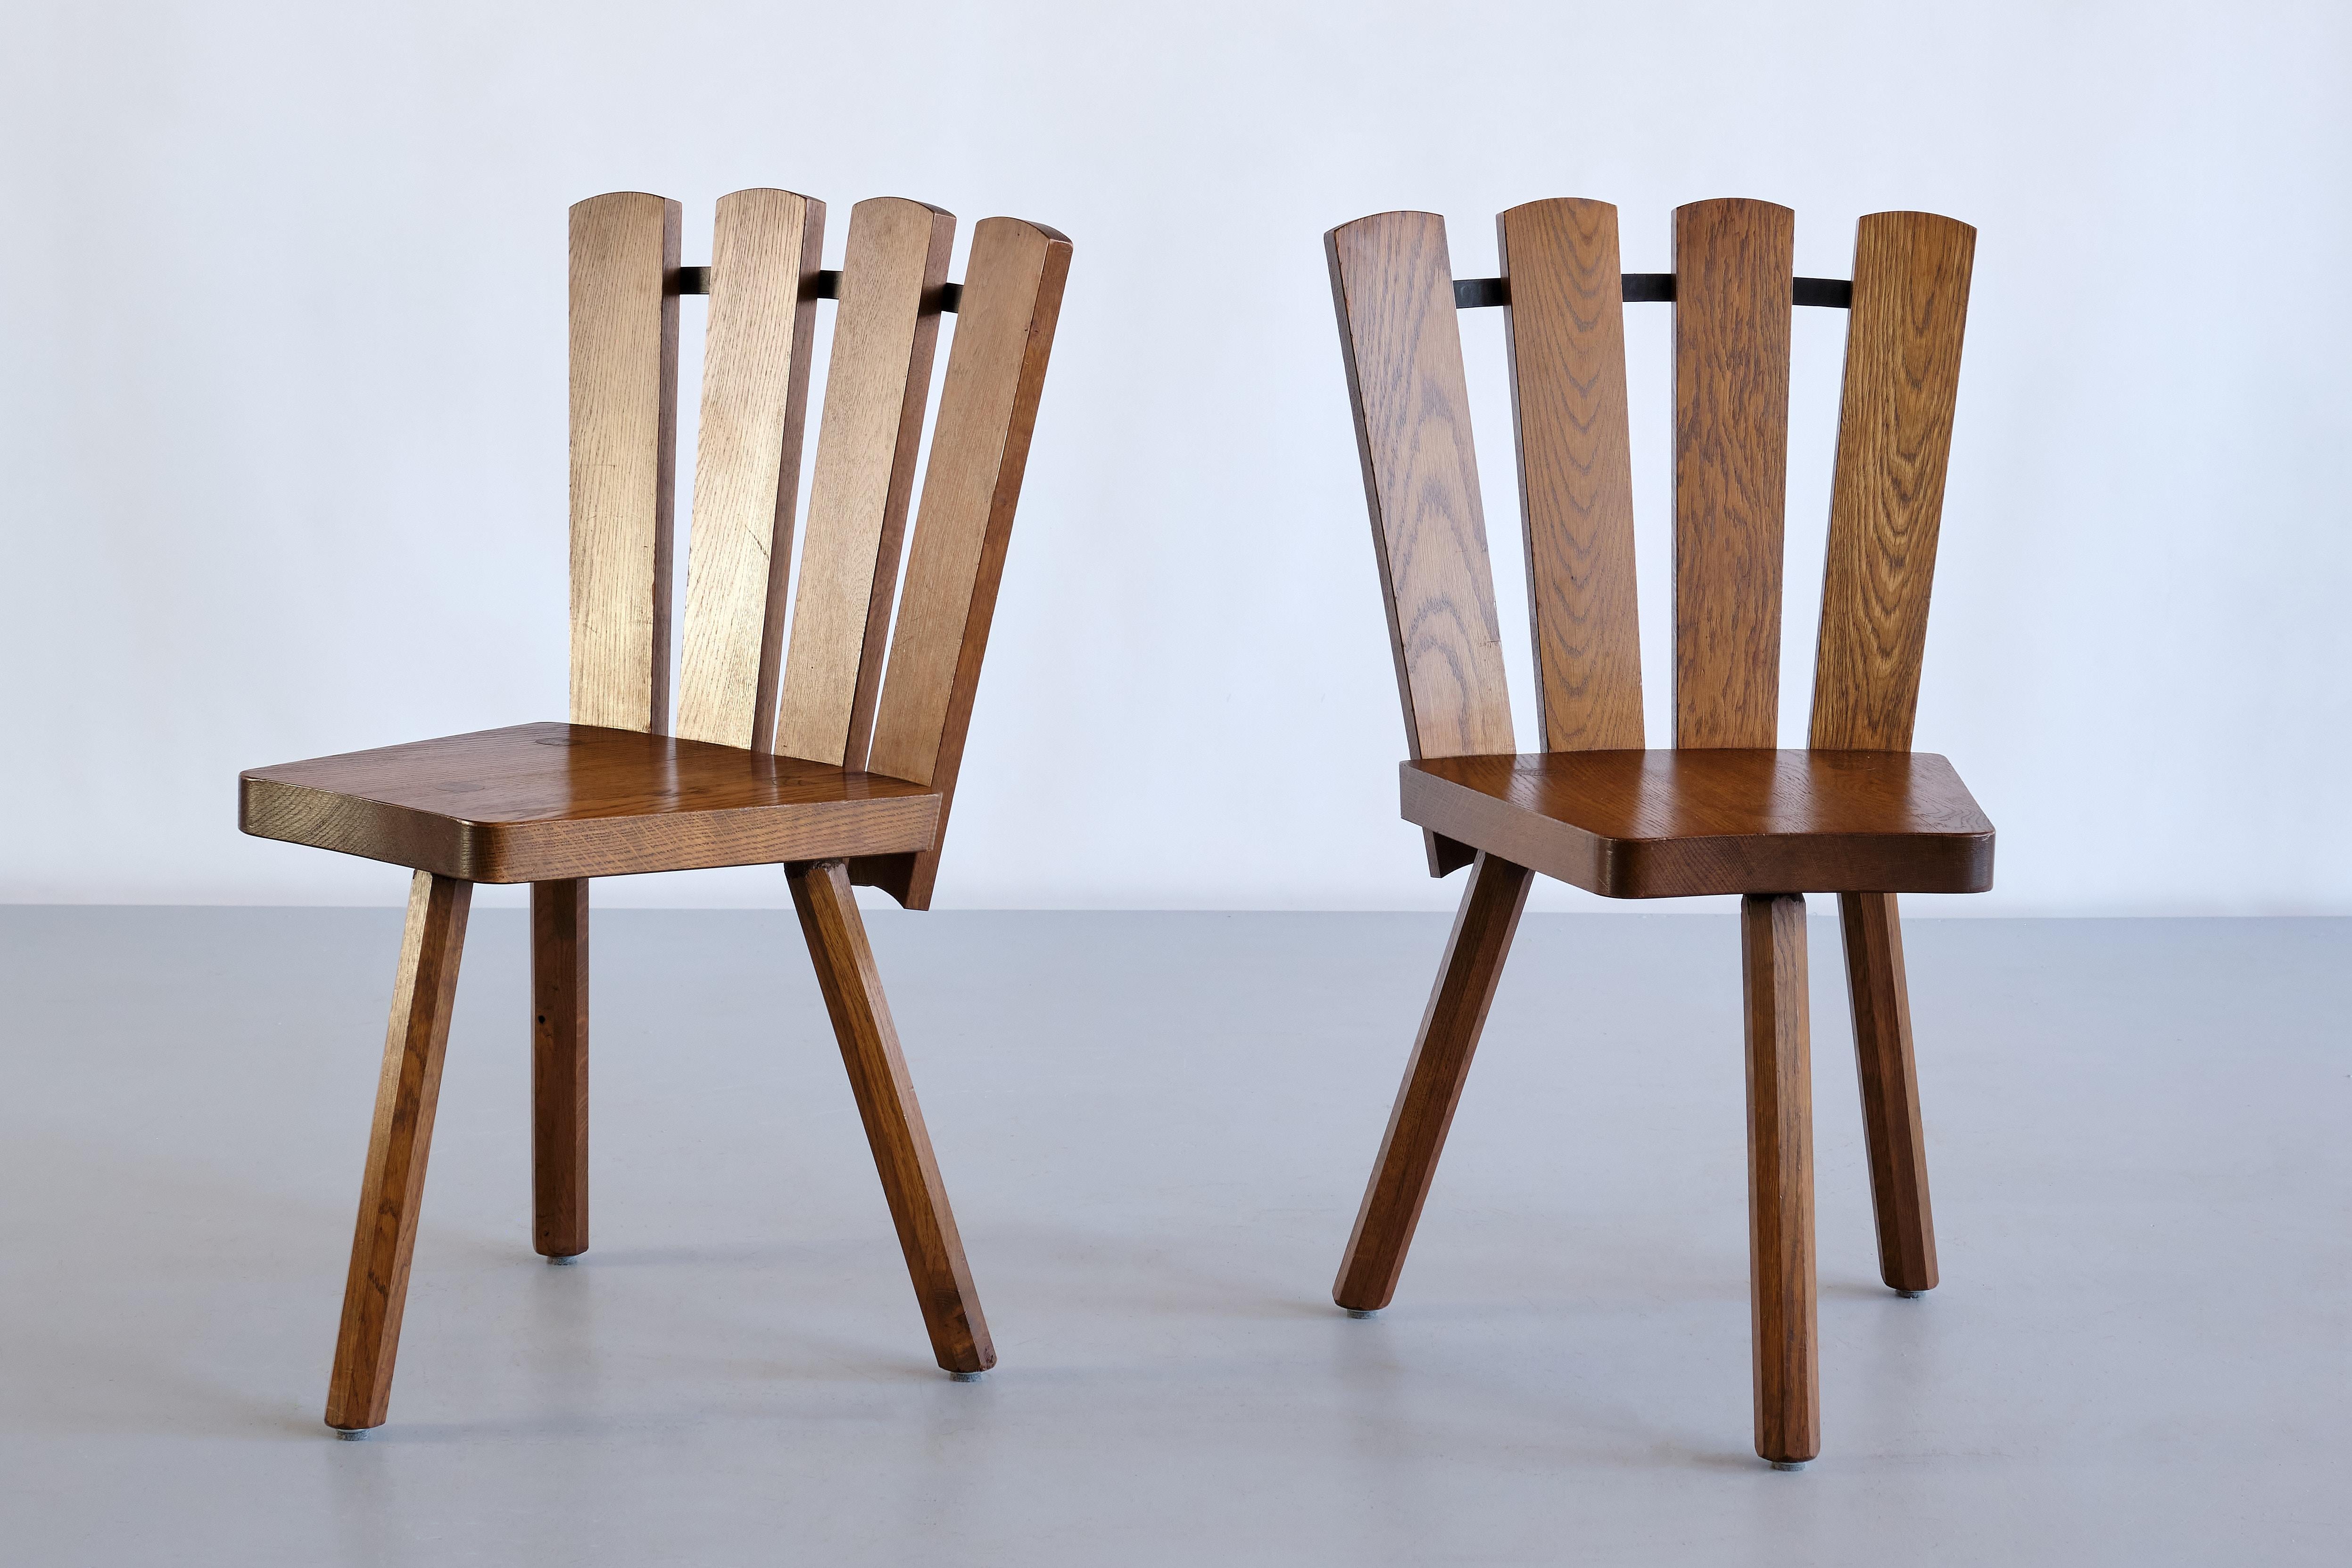 Steel Set of Four French Modern Tripod Oak Dining Chairs with Fan Shaped Back, 1950s For Sale